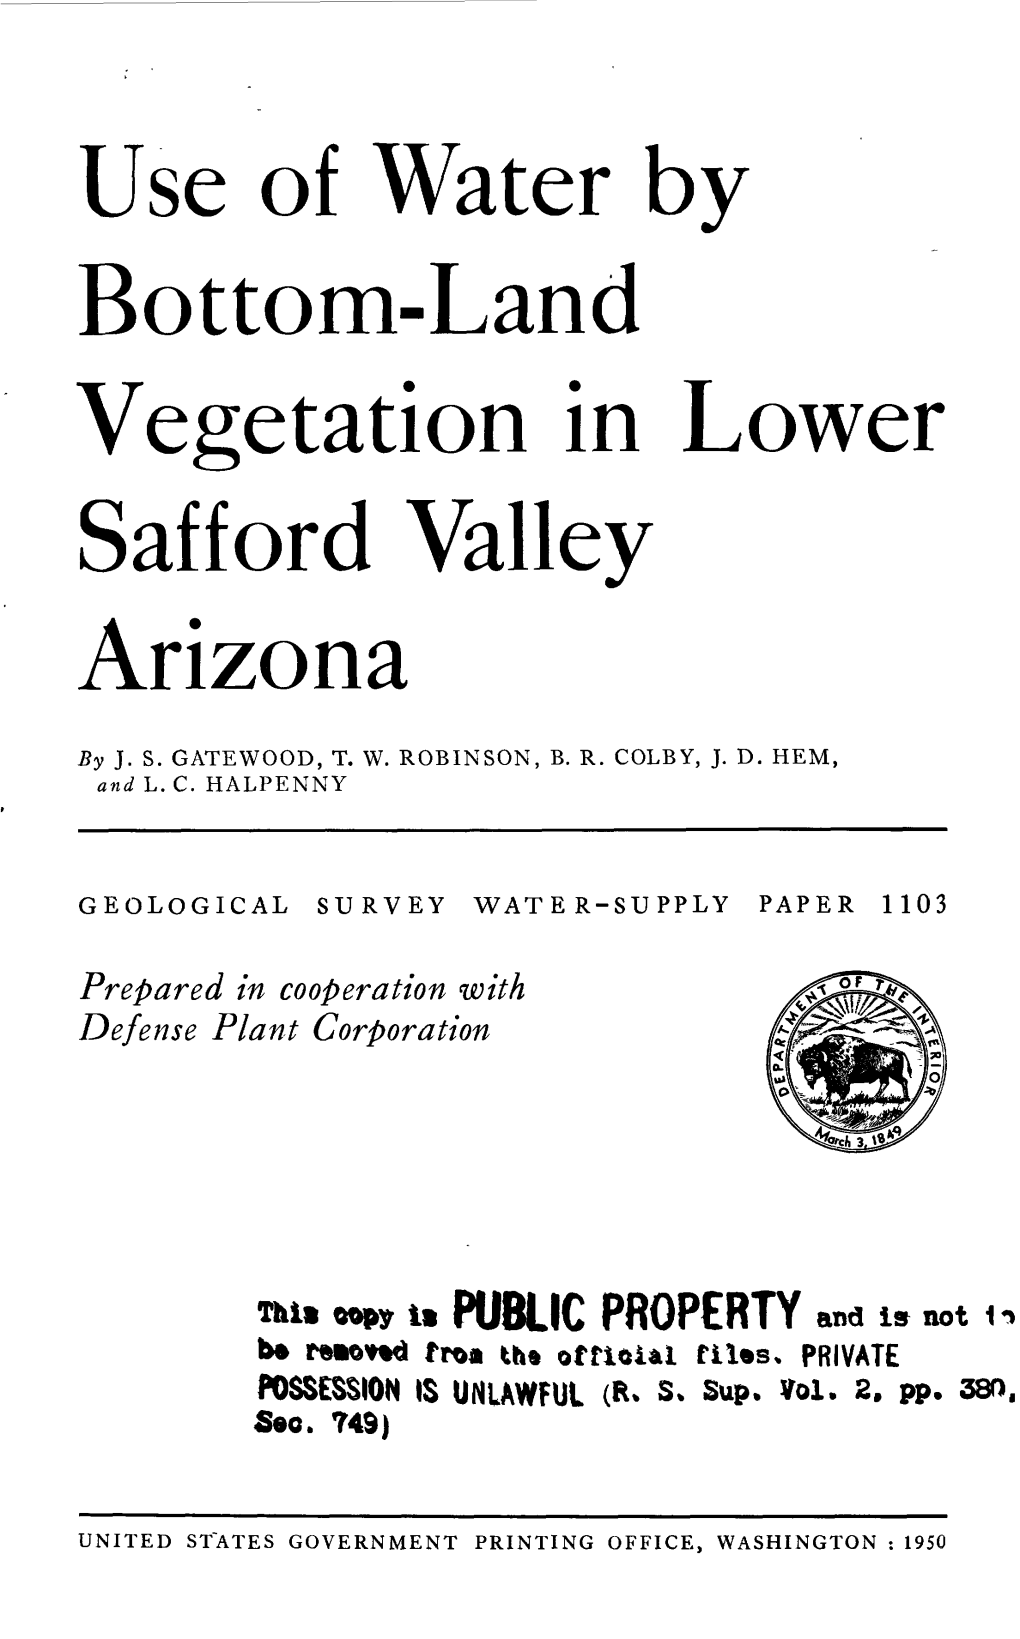 Use of Water by Bottom-Land Vegetation in Lower Safford Valley Arizona